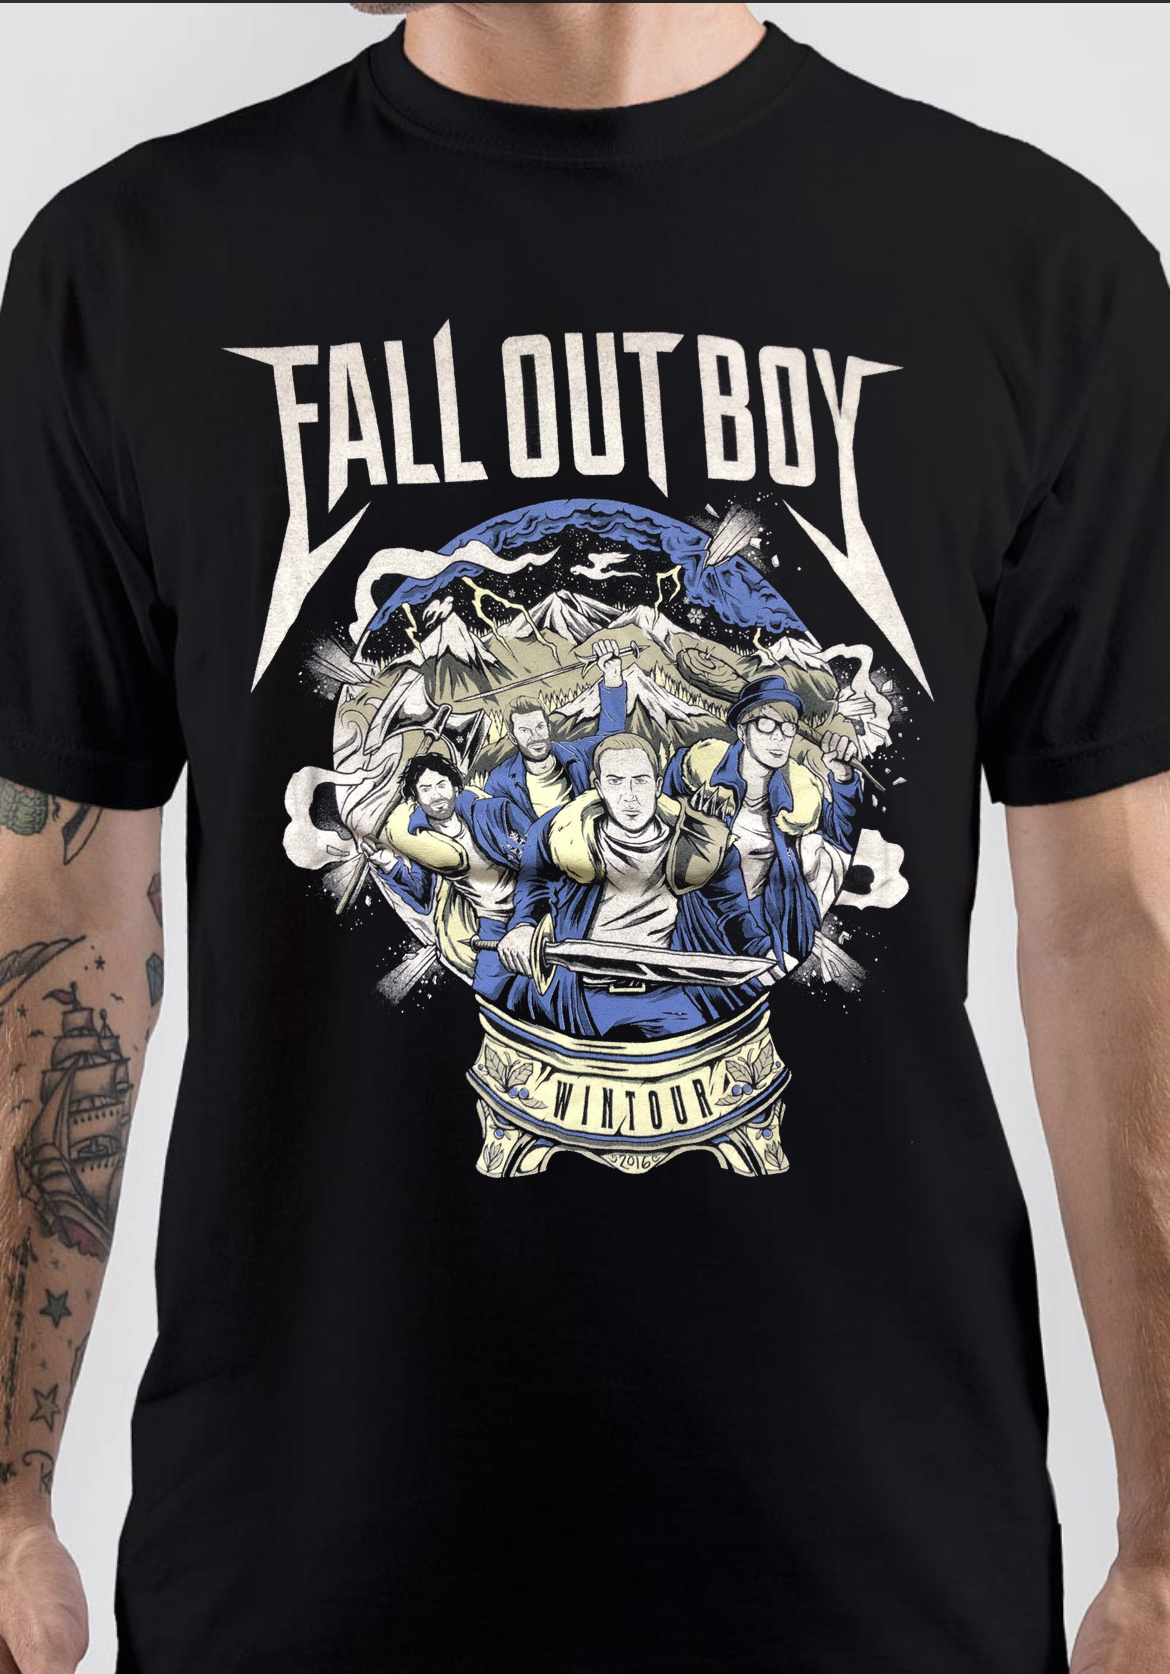 Fall Out Boy T-Shirt And Merchandise